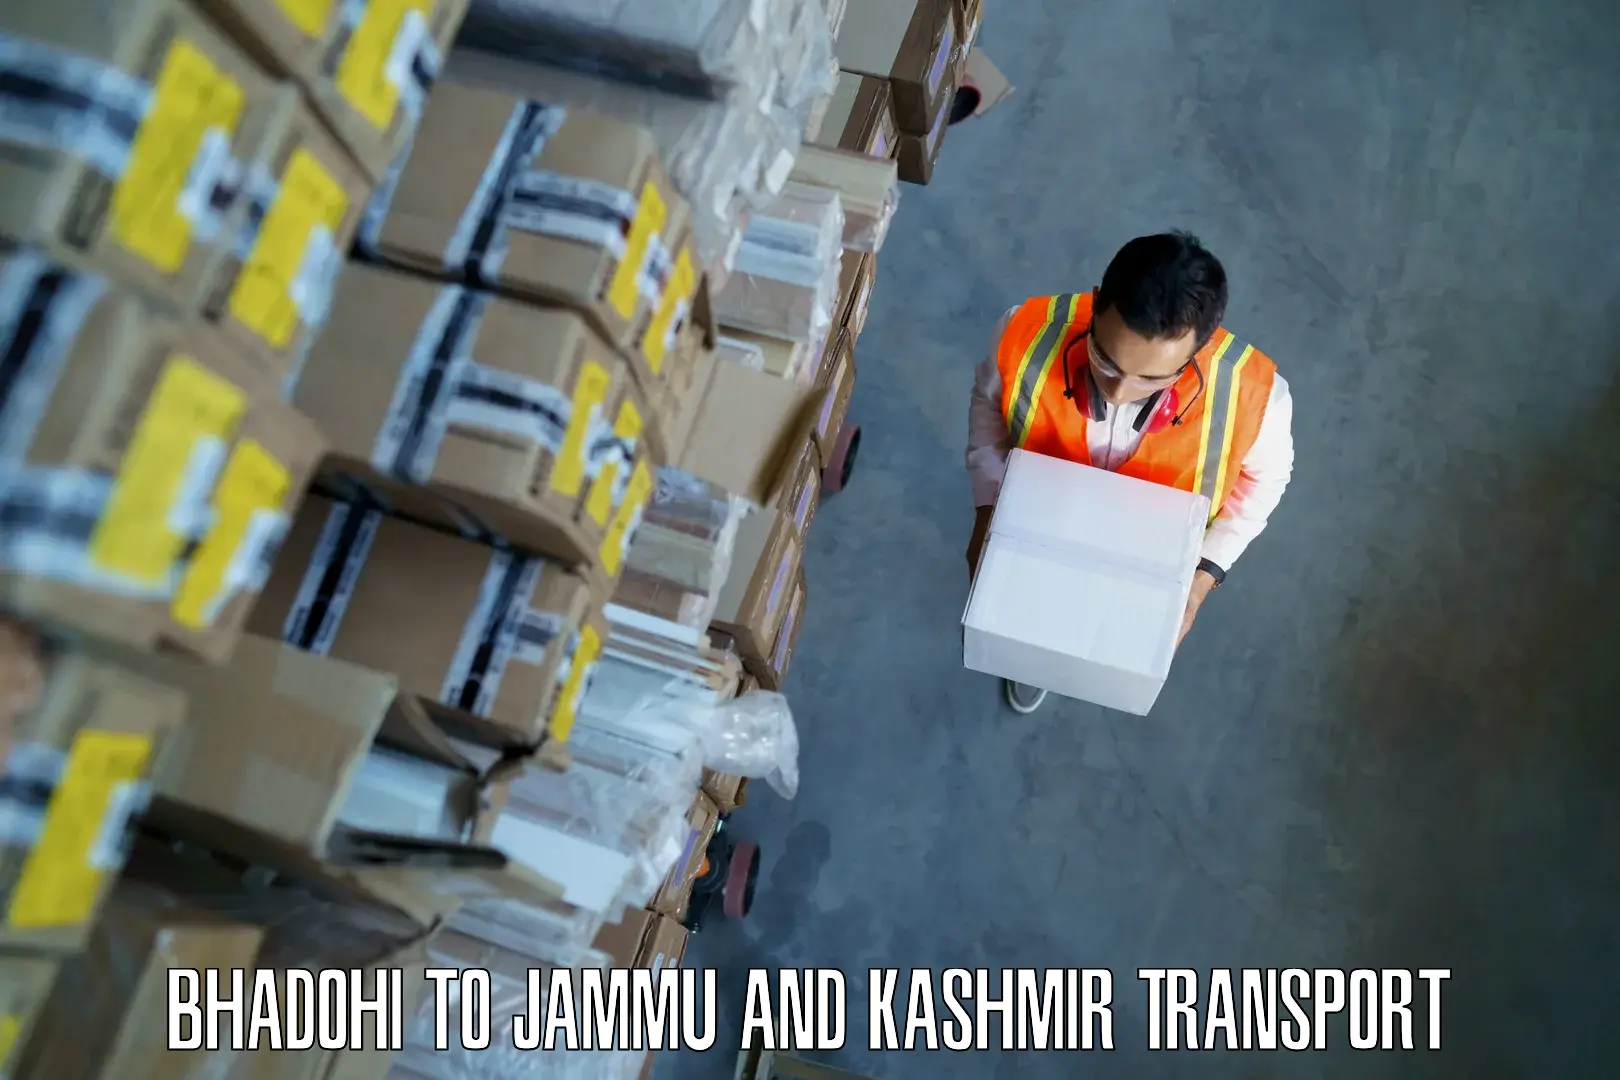 Truck transport companies in India Bhadohi to Jammu and Kashmir